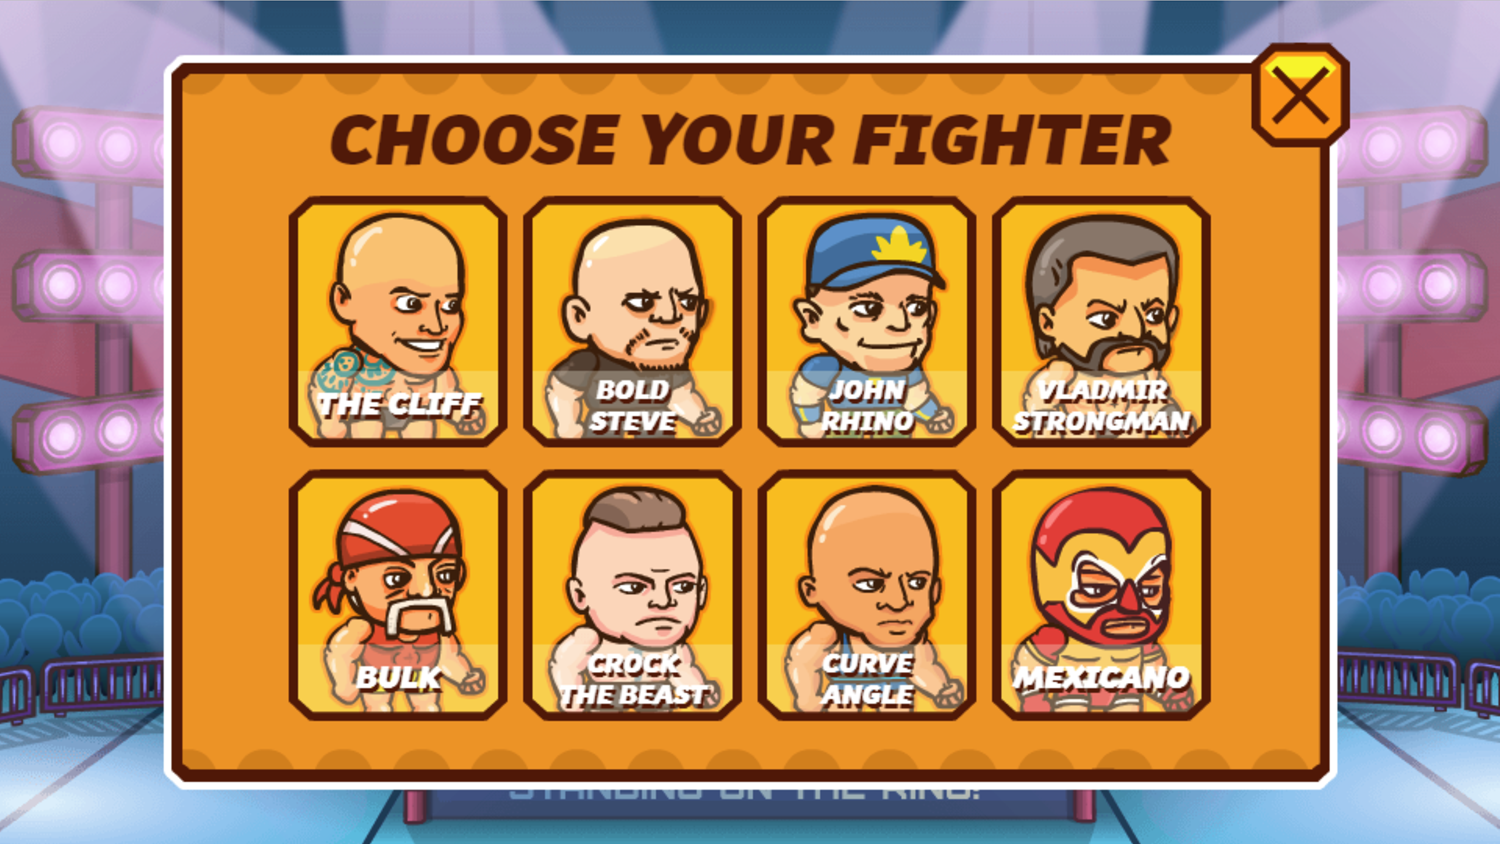 Pro Wrestling Action Game Choose Your Fighter Screen Screenshot.